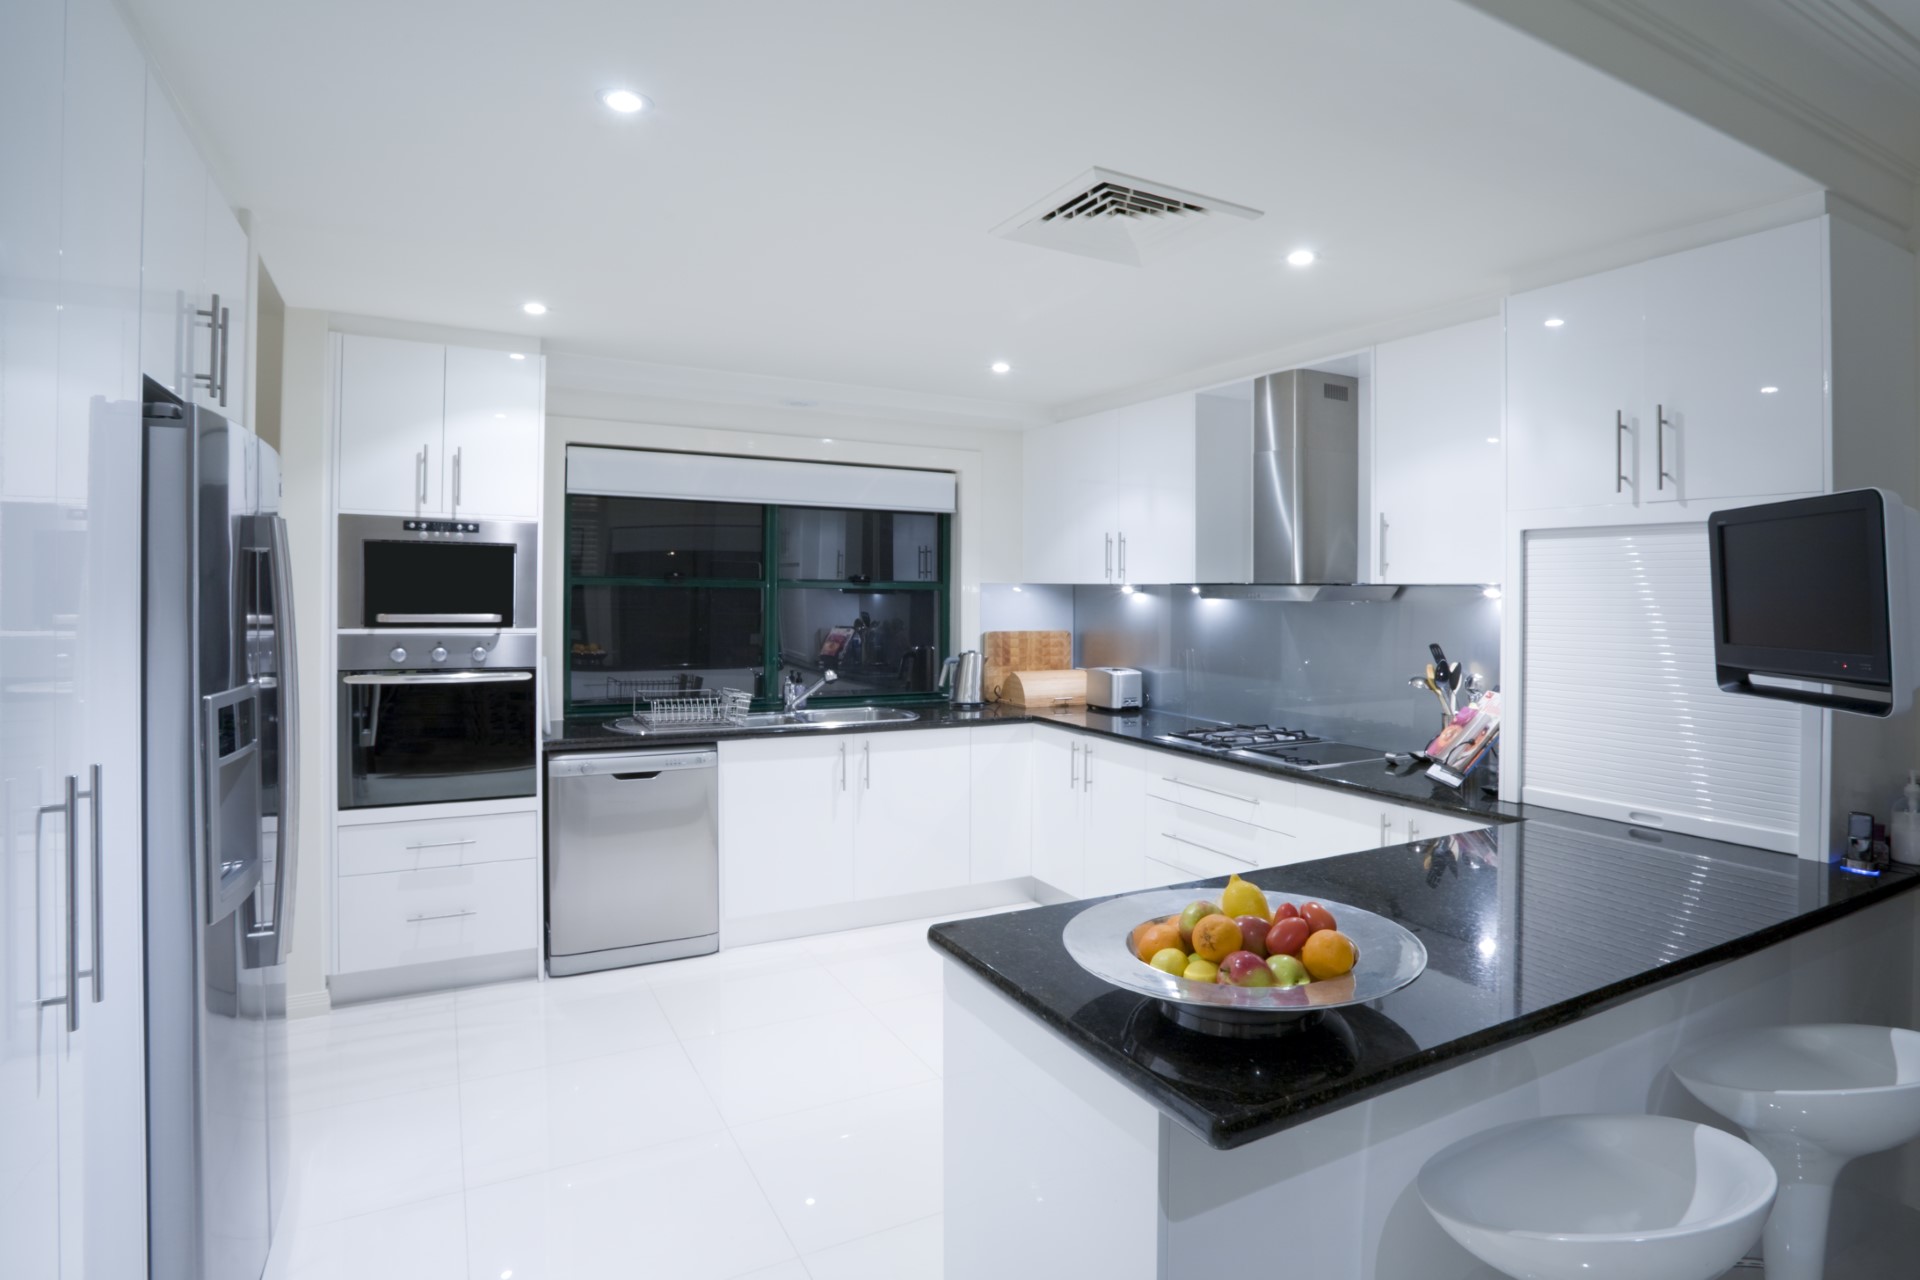 A modern kitchen with high gloss white cabinets, glossy black marble counter tops, glossy white tile floors, and stainless steel appliances. There is a bowl of fruit on the counter.